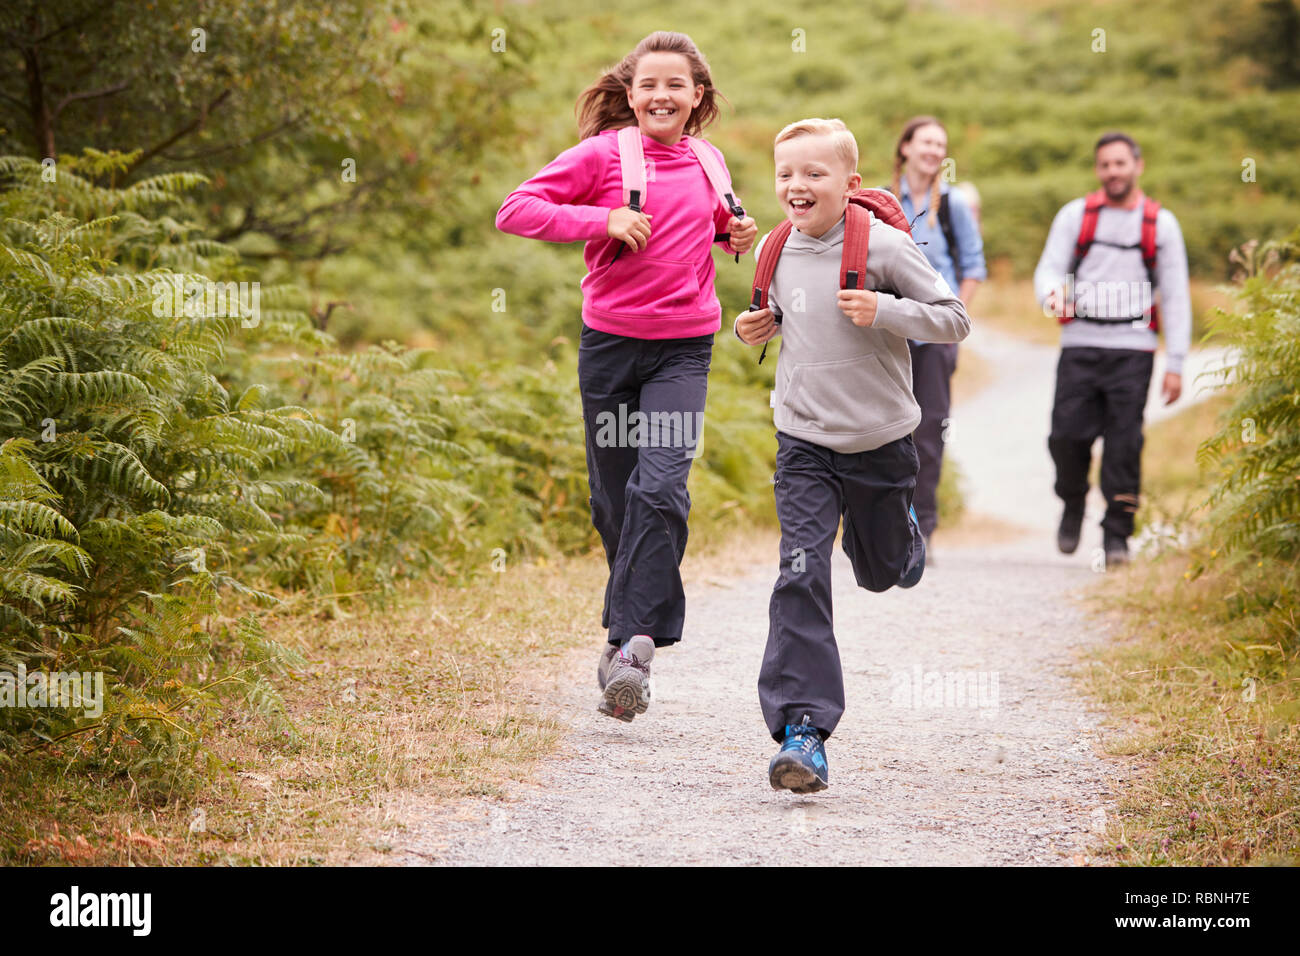 Children running ahead of parents, walking on a country path during a family camping trip, front view, close up Stock Photo